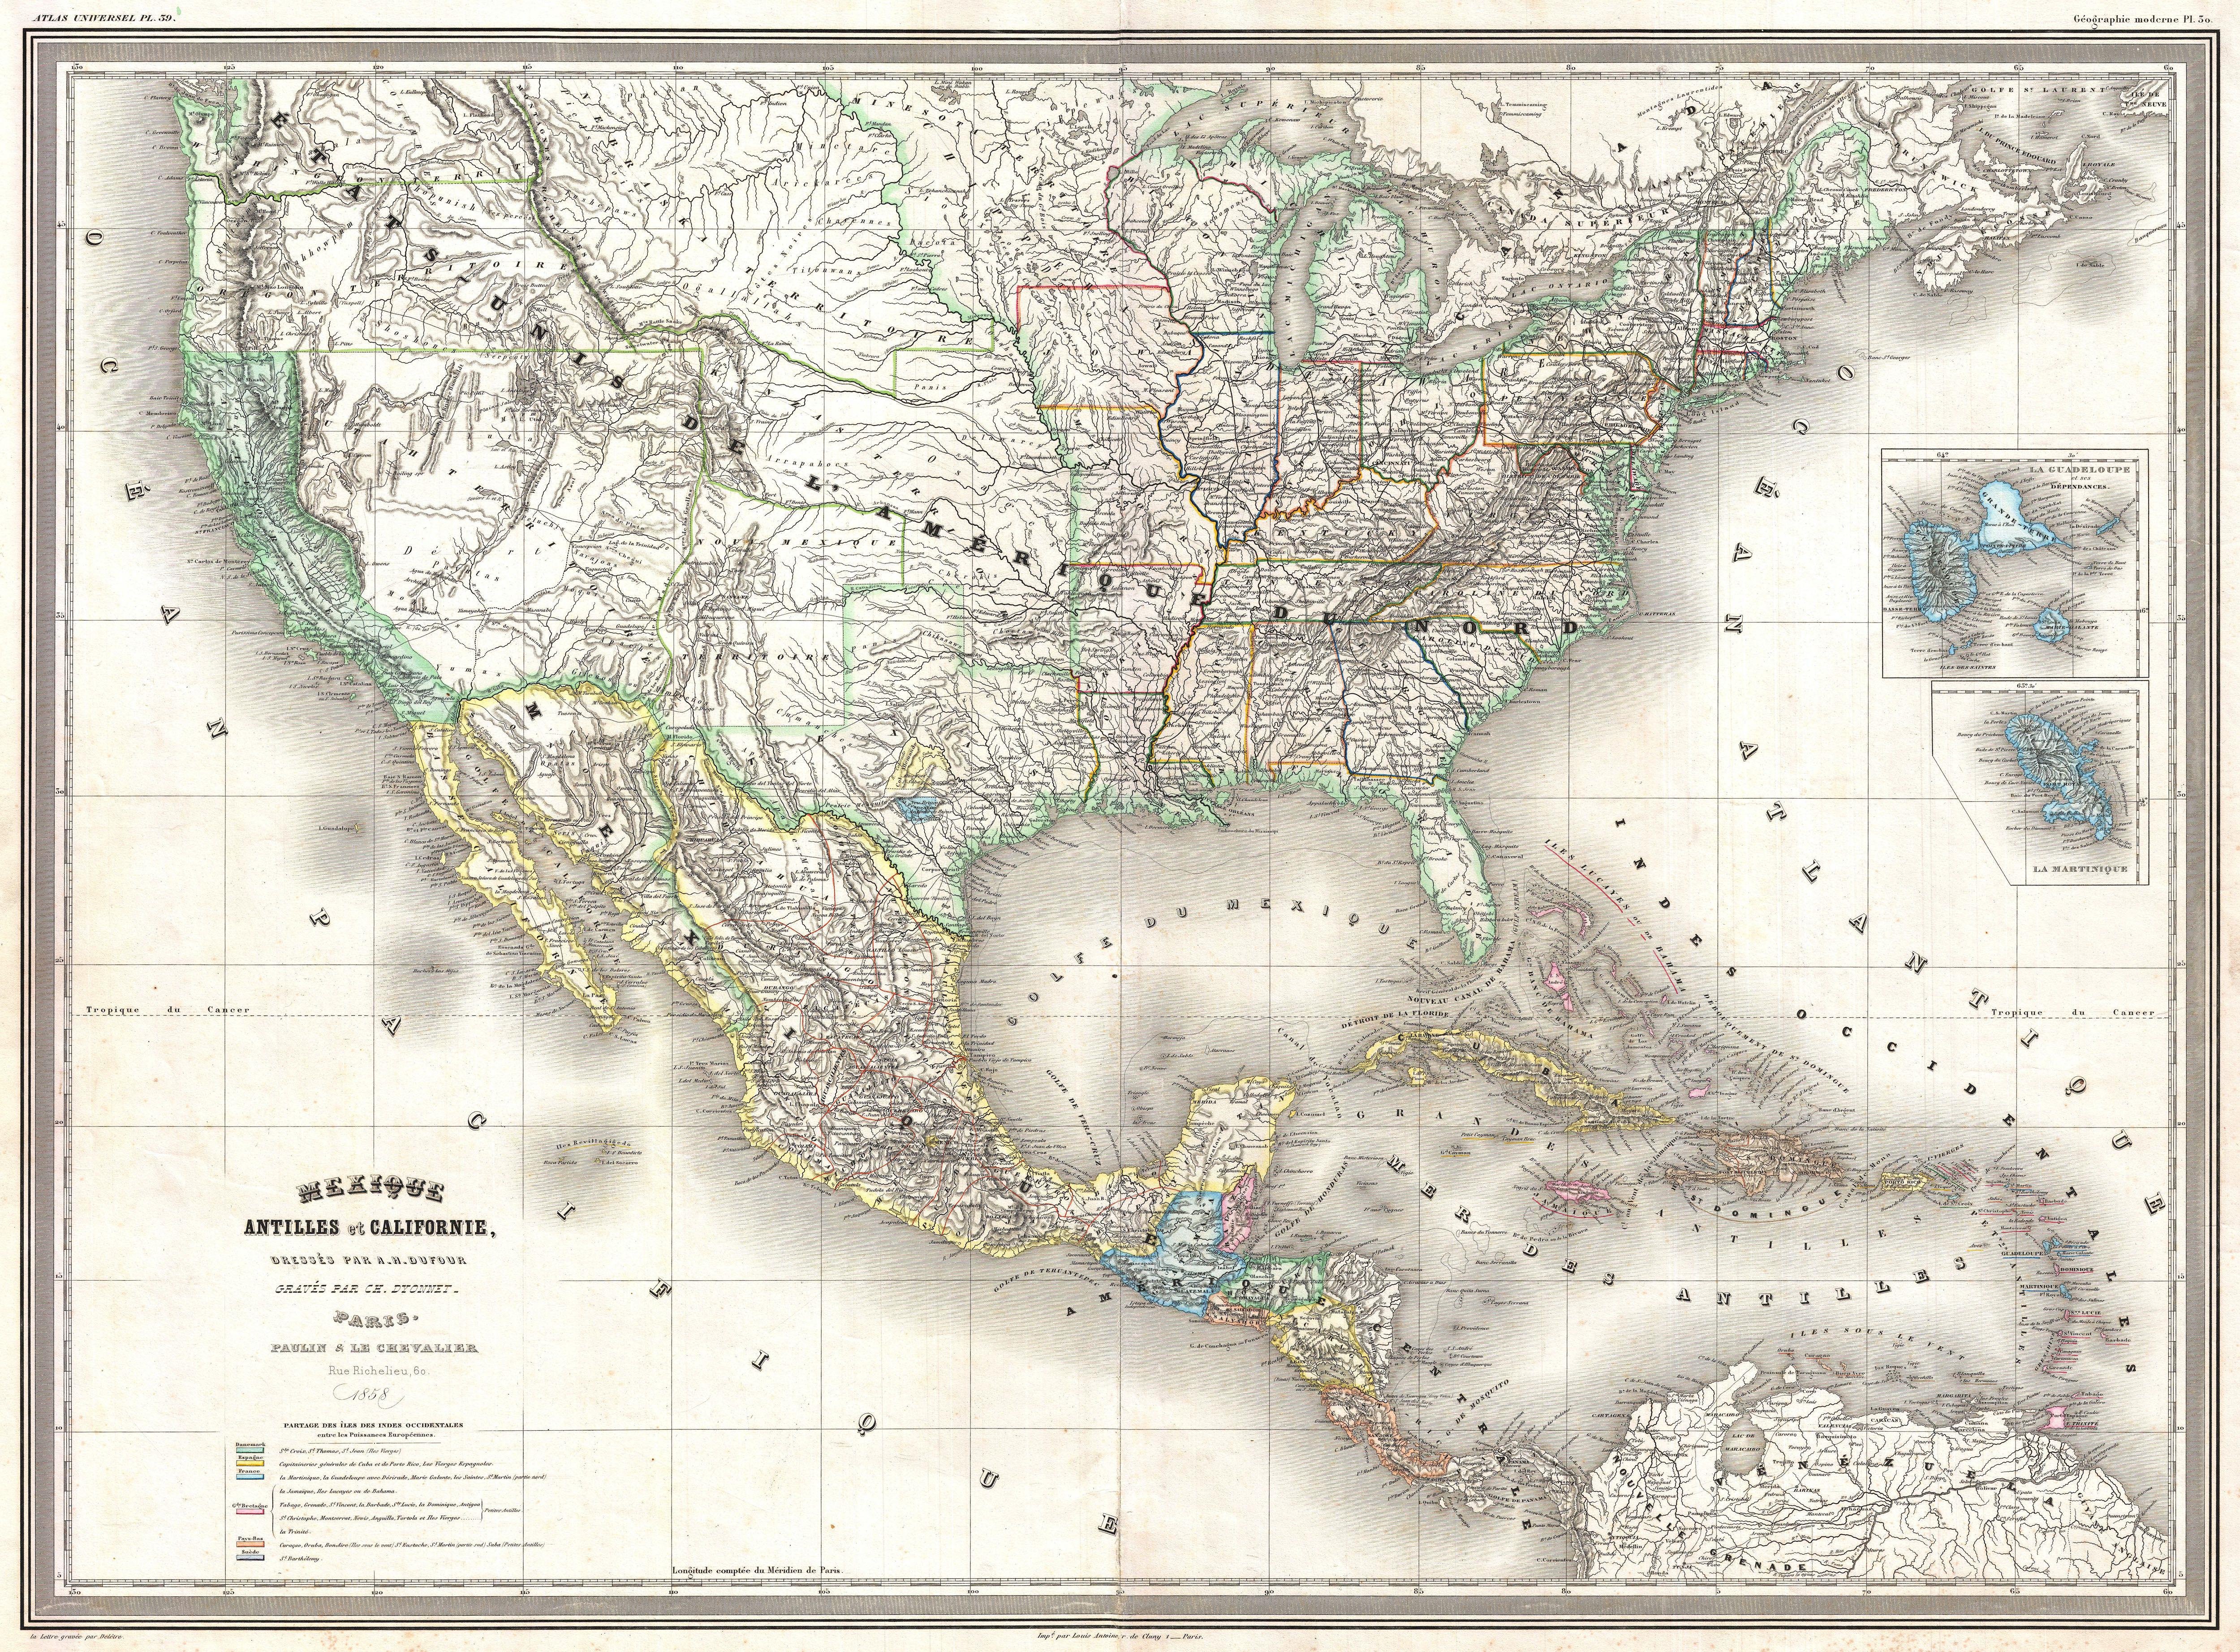 1858 Dufour Map of the United States - Geographicus - UnitedStates-dufour-1858